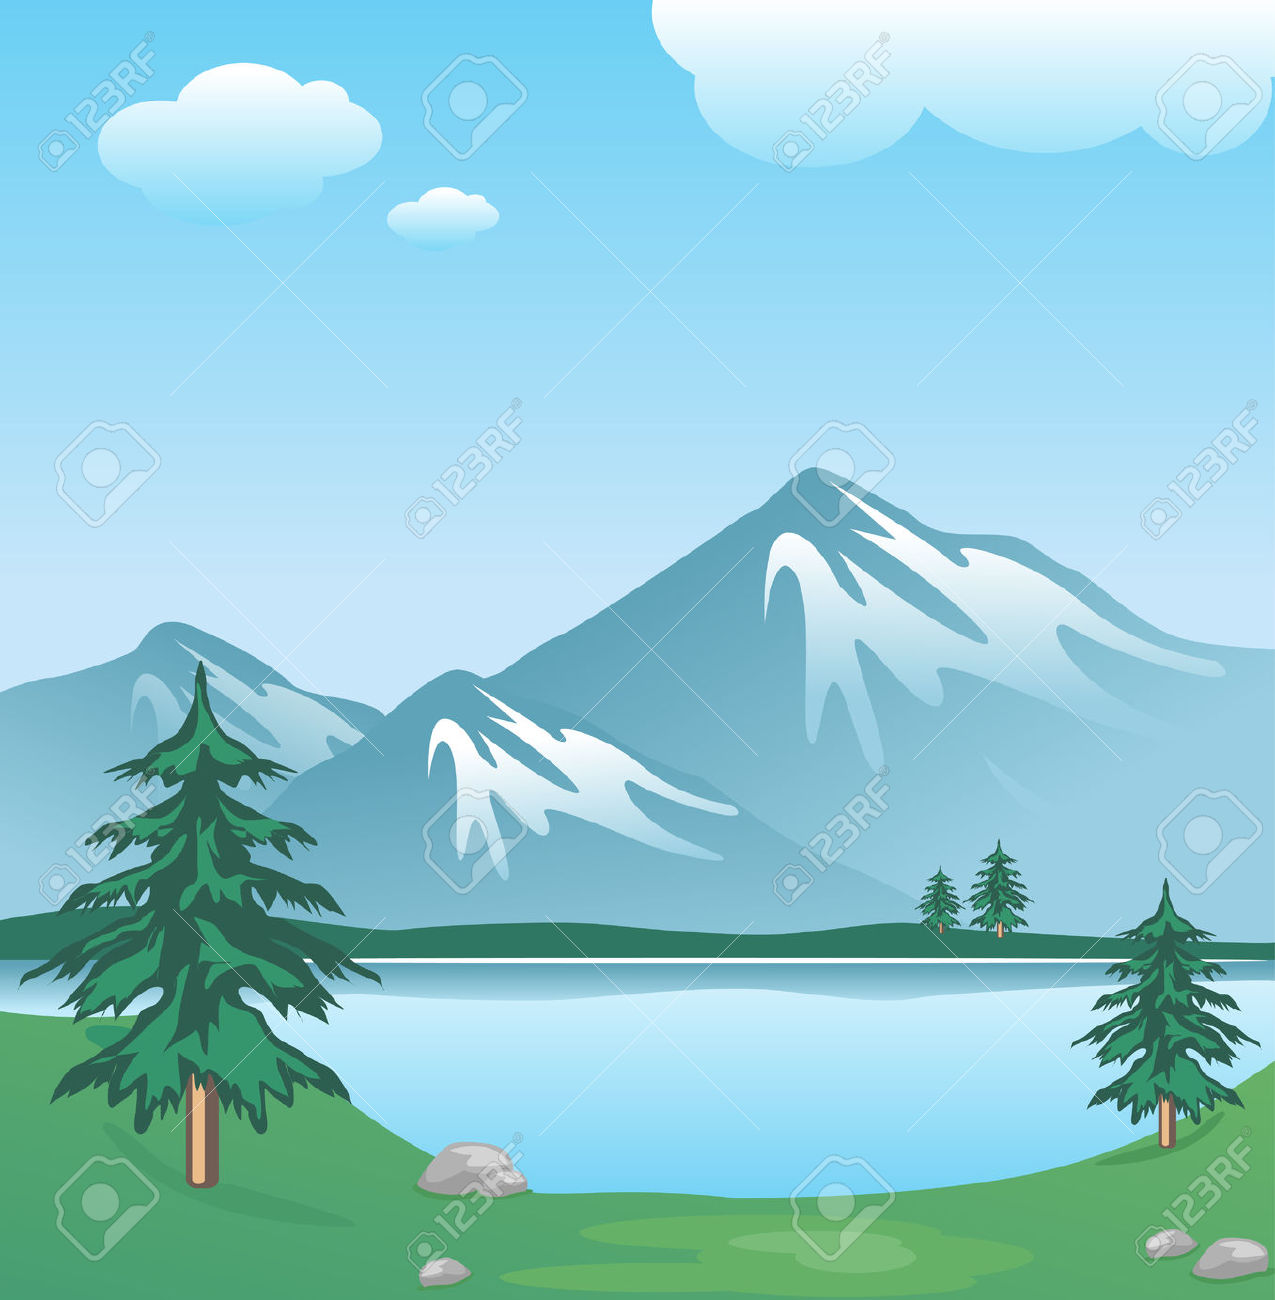 Lake clipart techlodia clipart clipart image